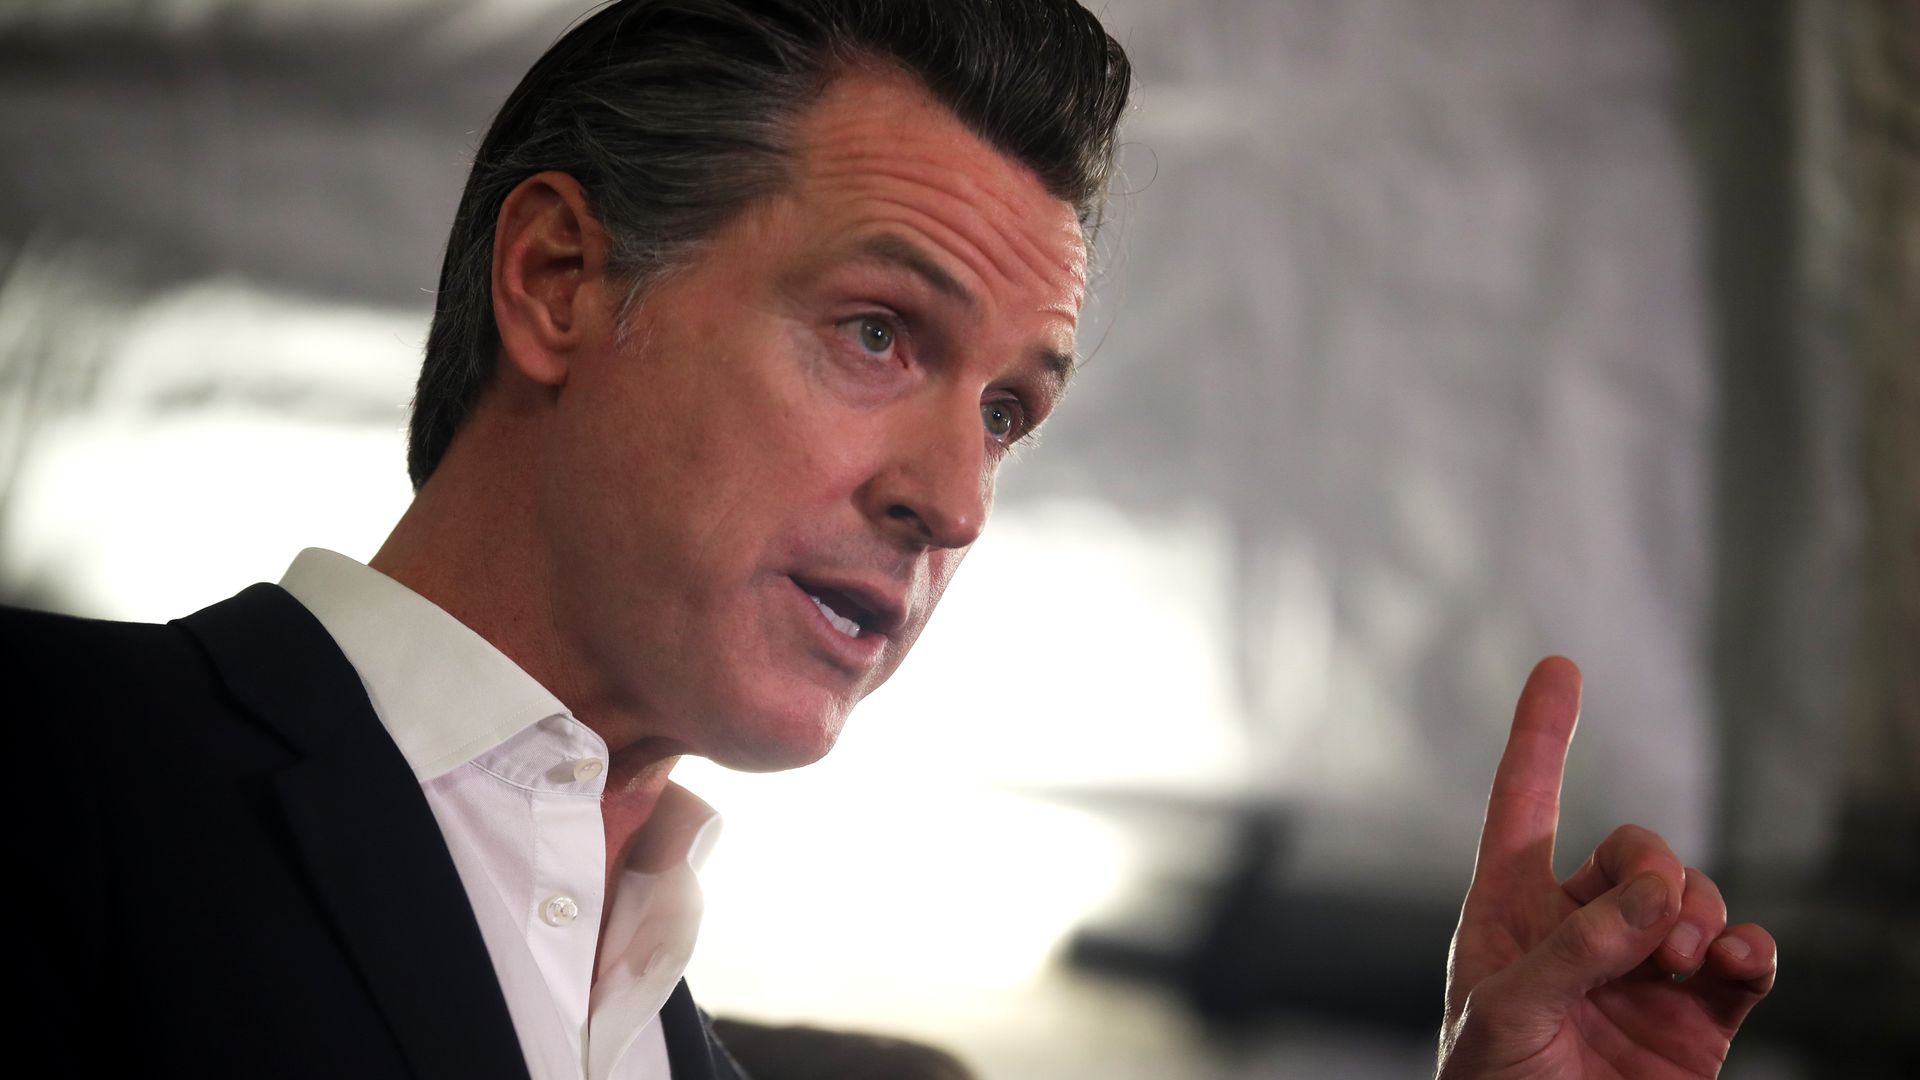 Photo of Gavin Newsom speaking while gesturing with one hand